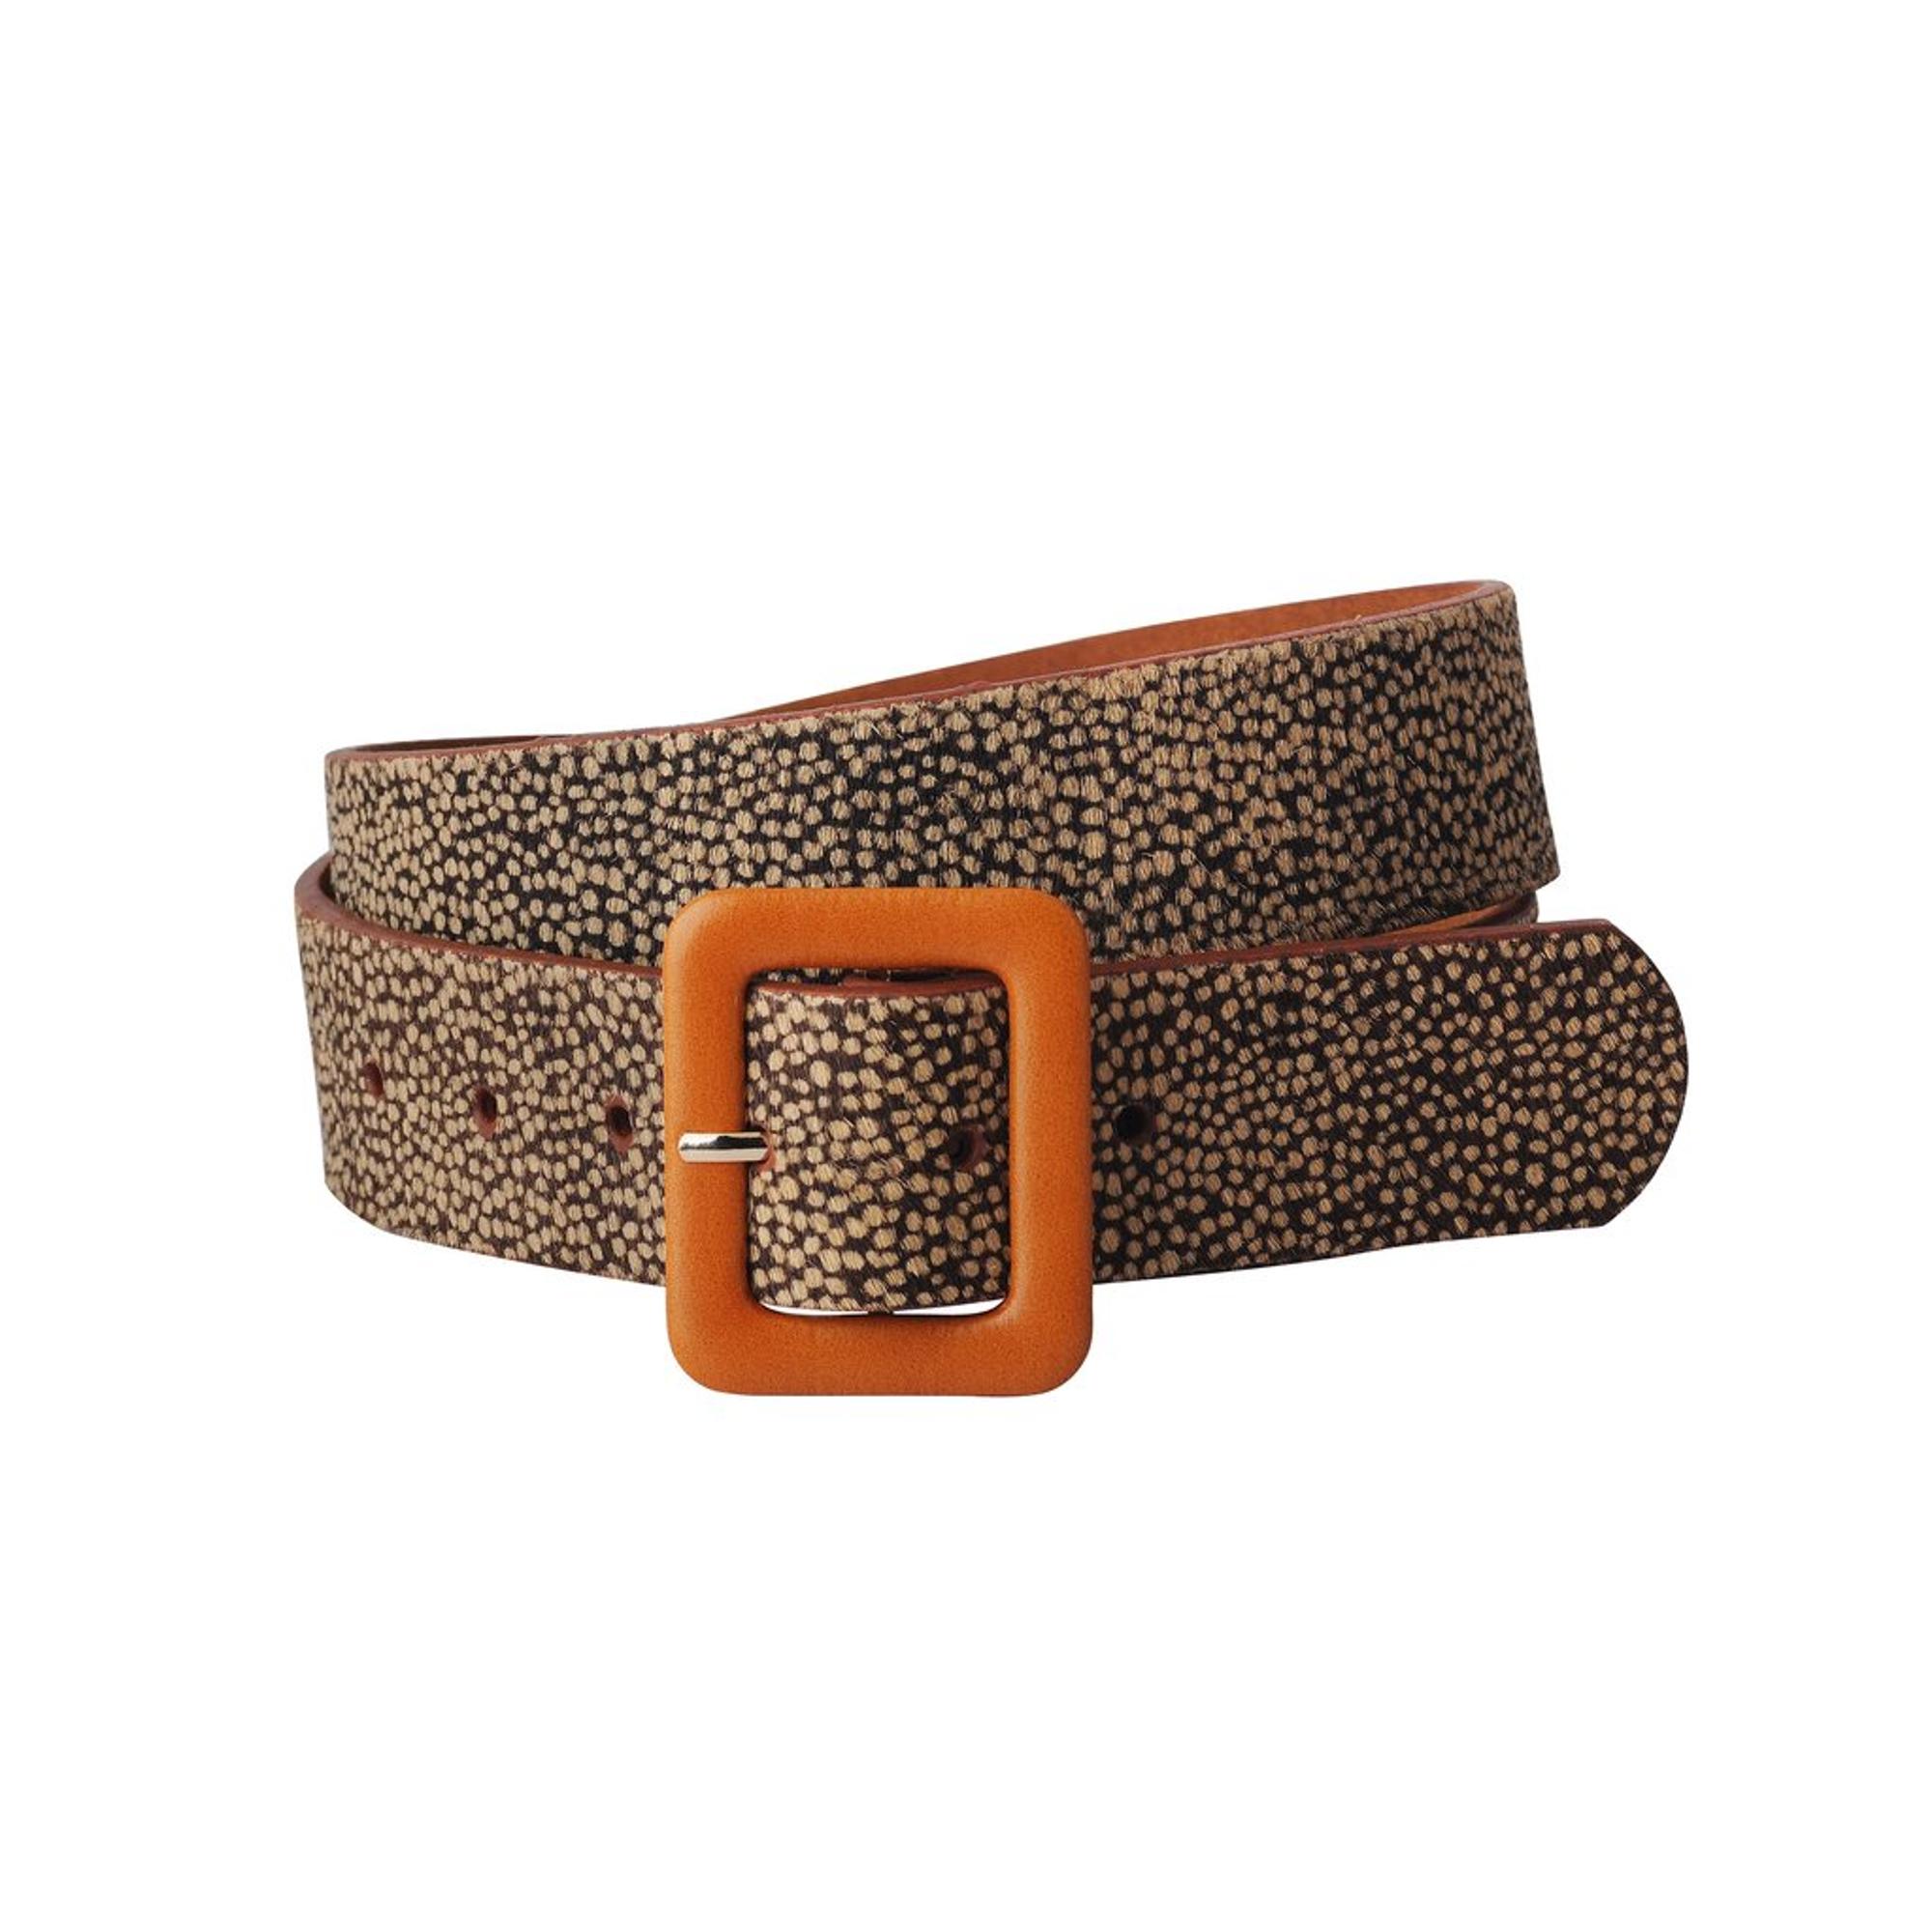 Spotted Giraffe Print Calf Hair Belt With Leather Buckle